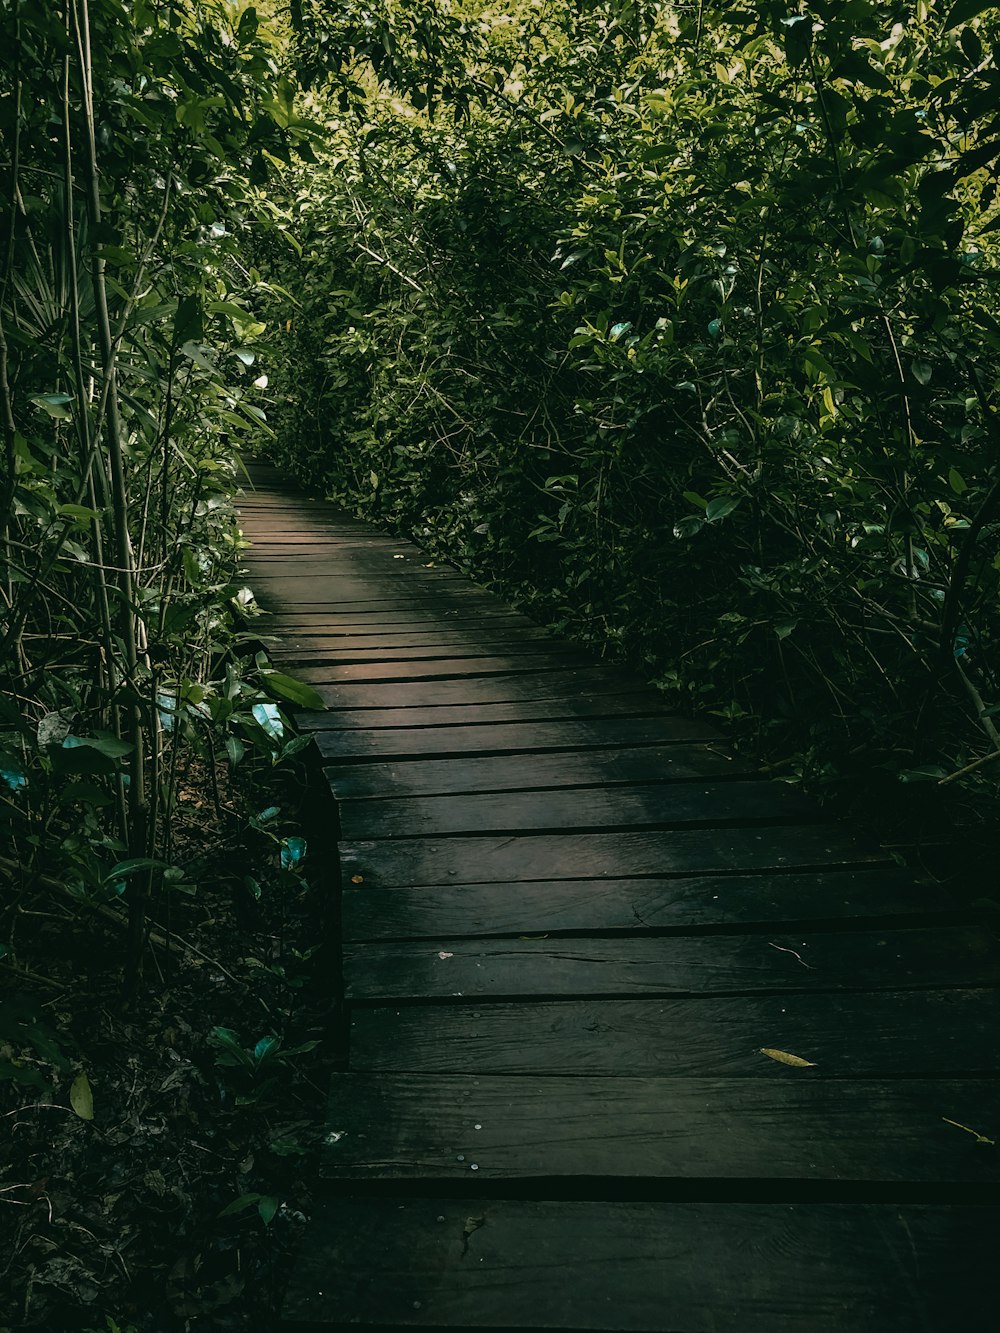 brown wooden bridge in the middle of green plants